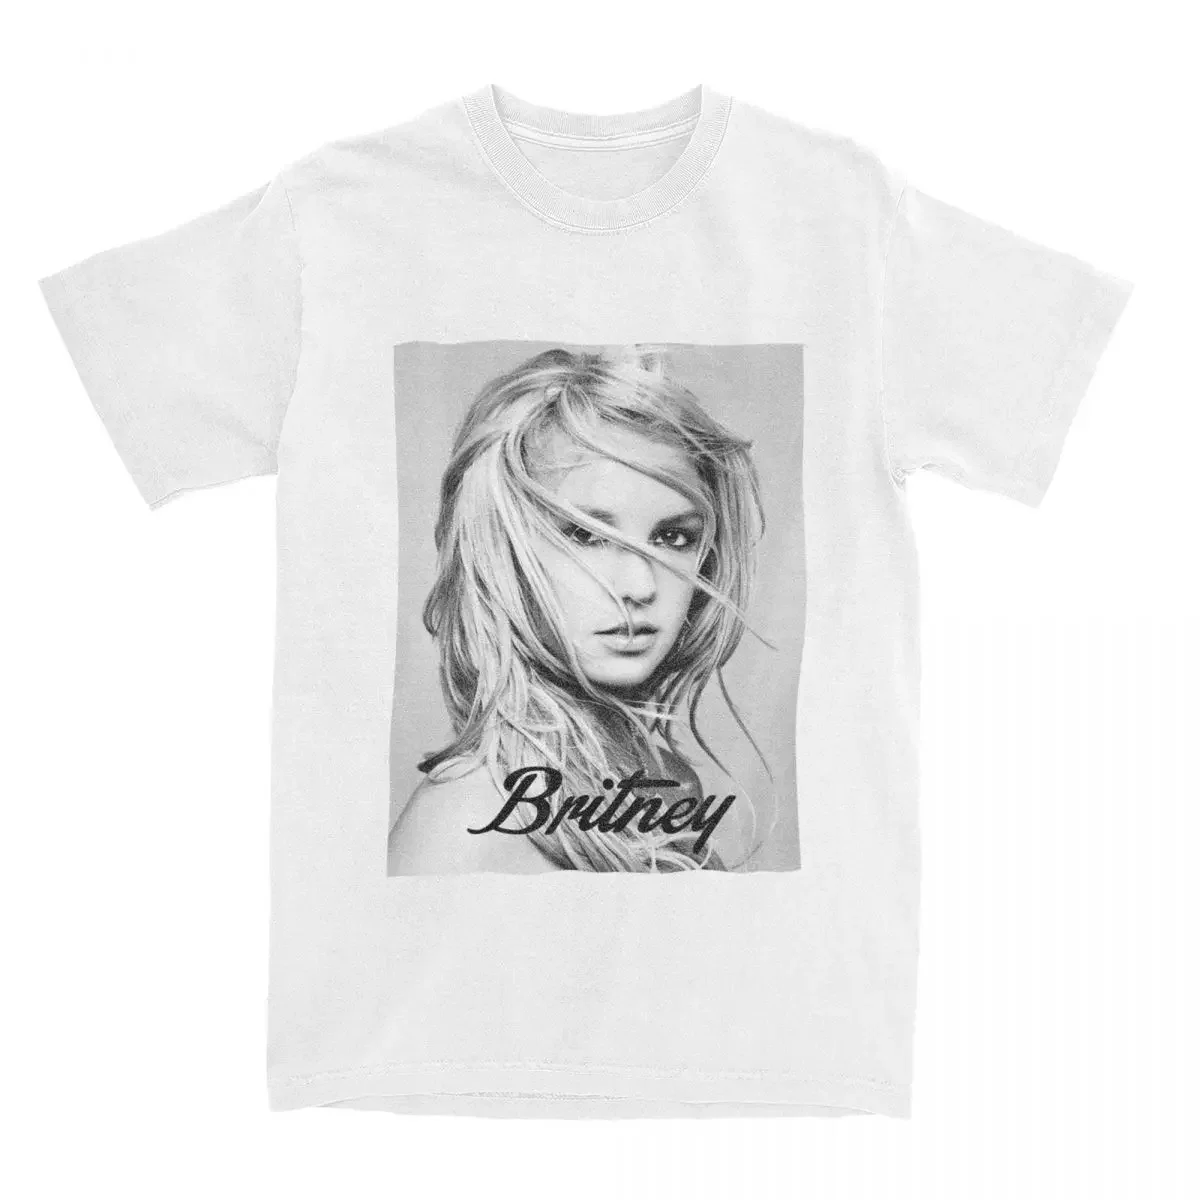 

Britney Spears Wind T Shirts Anime Graphic T-shirts for Men Clothing Women Short Sleeve Tees New Arrivals Unisex Summer